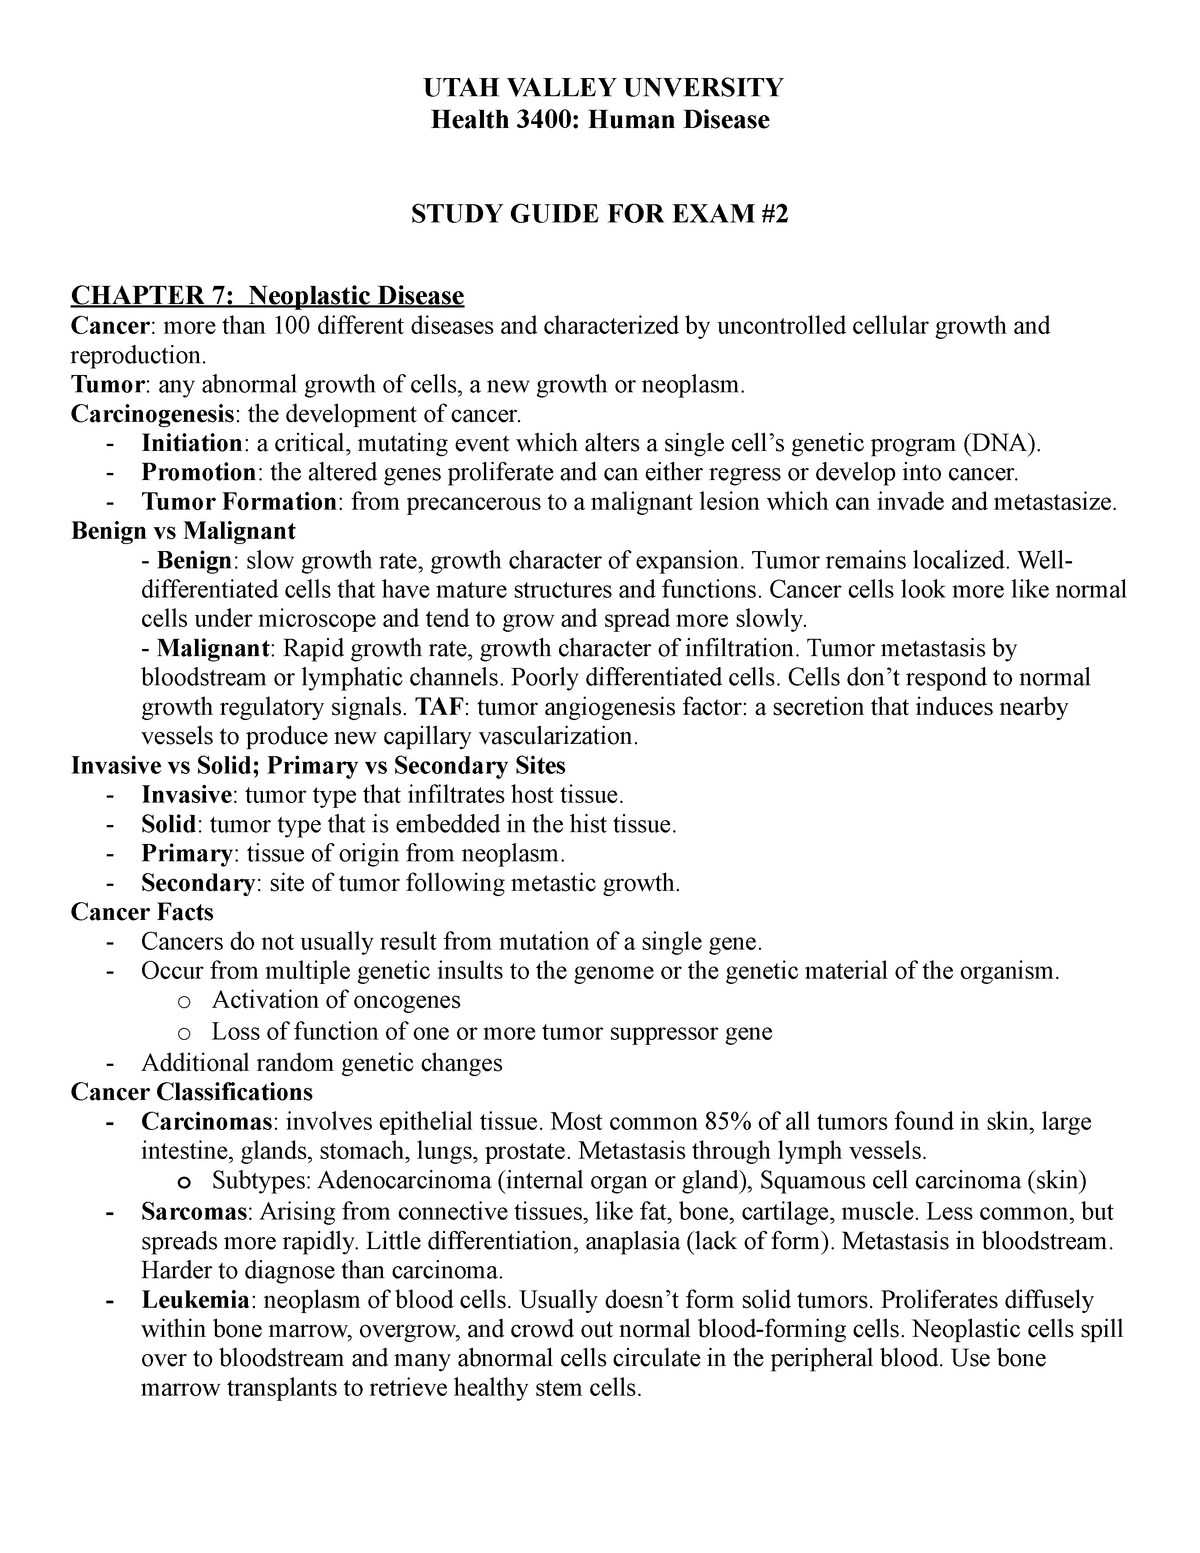 study-guide-2-utah-valley-unversity-health-3400-human-disease-study-guide-for-exam-chapter-7